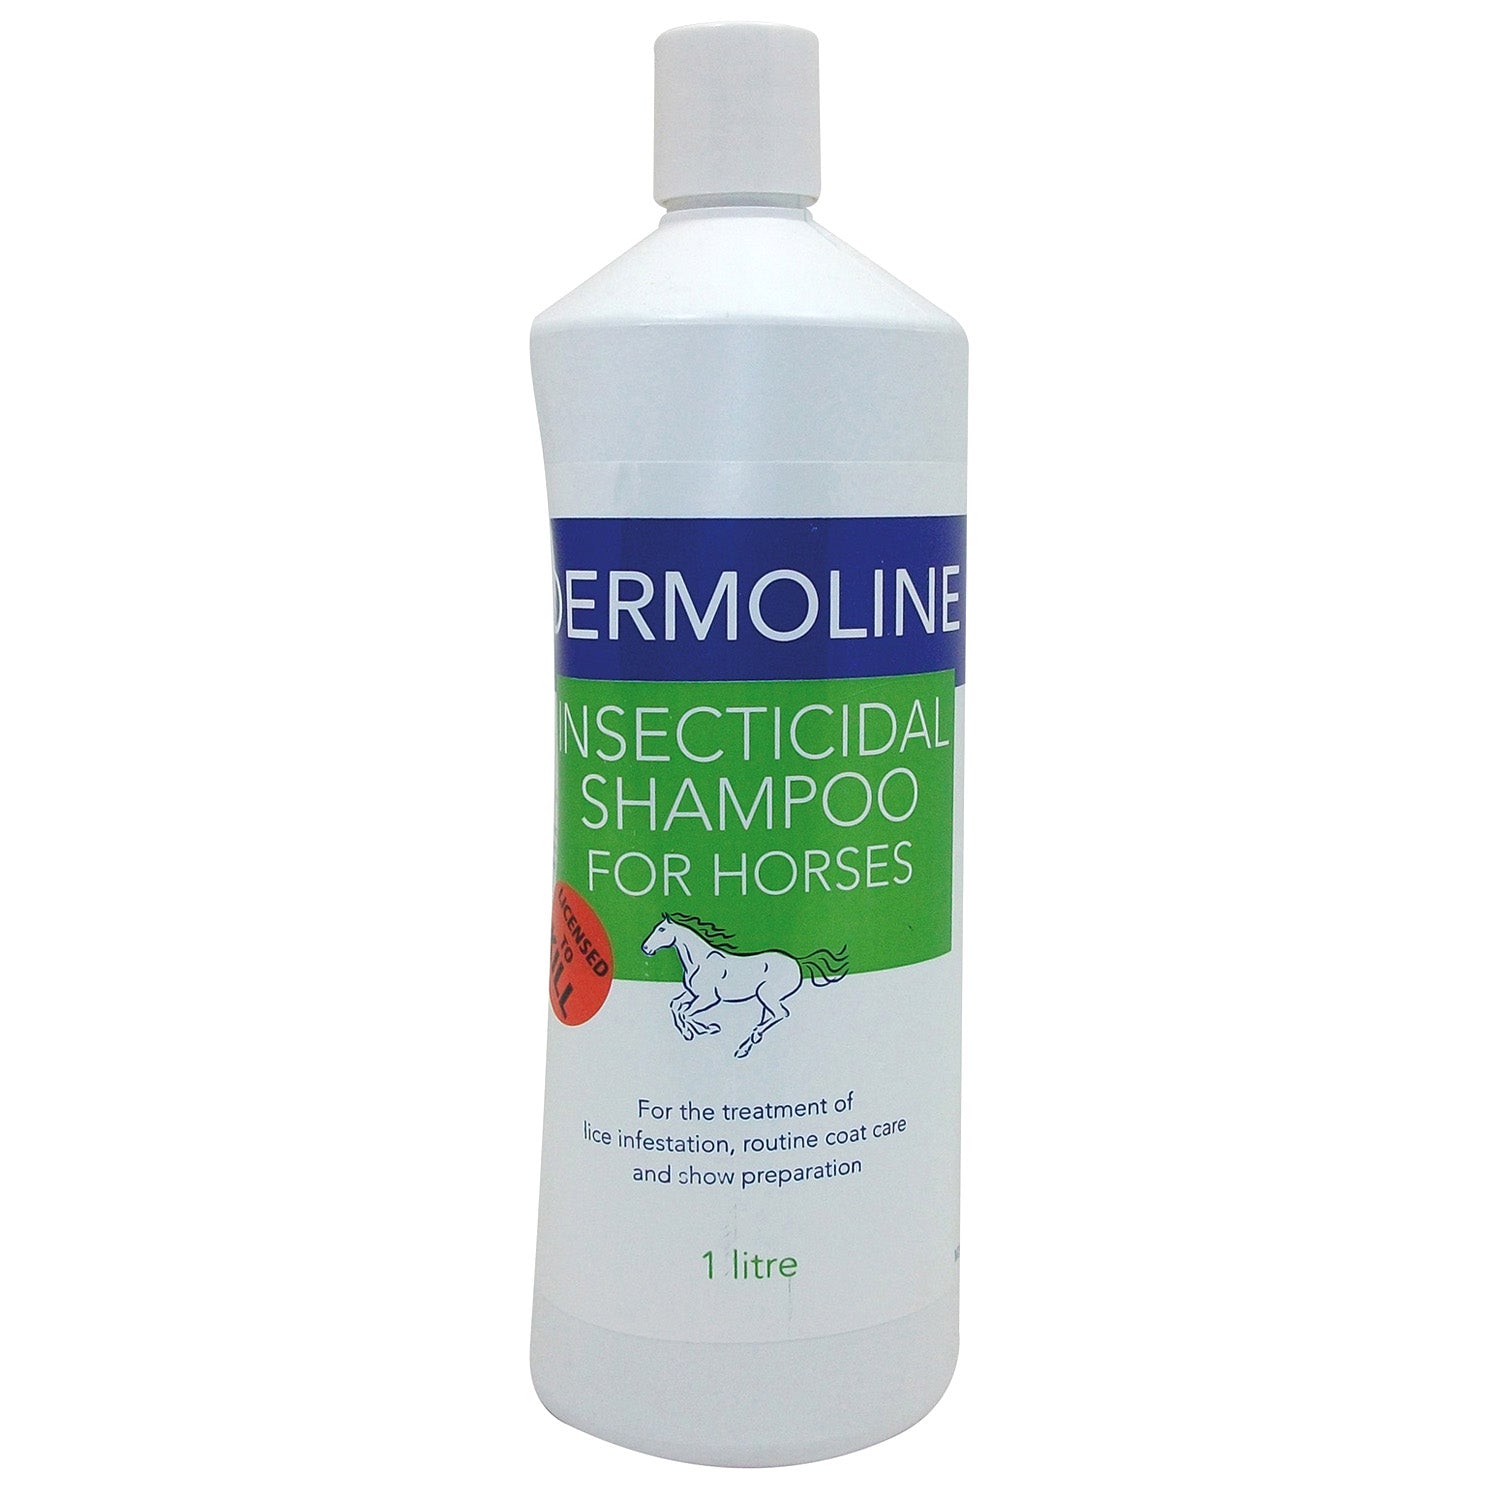 Dermoline Insect Shampoo For Horses - 1 Litre 